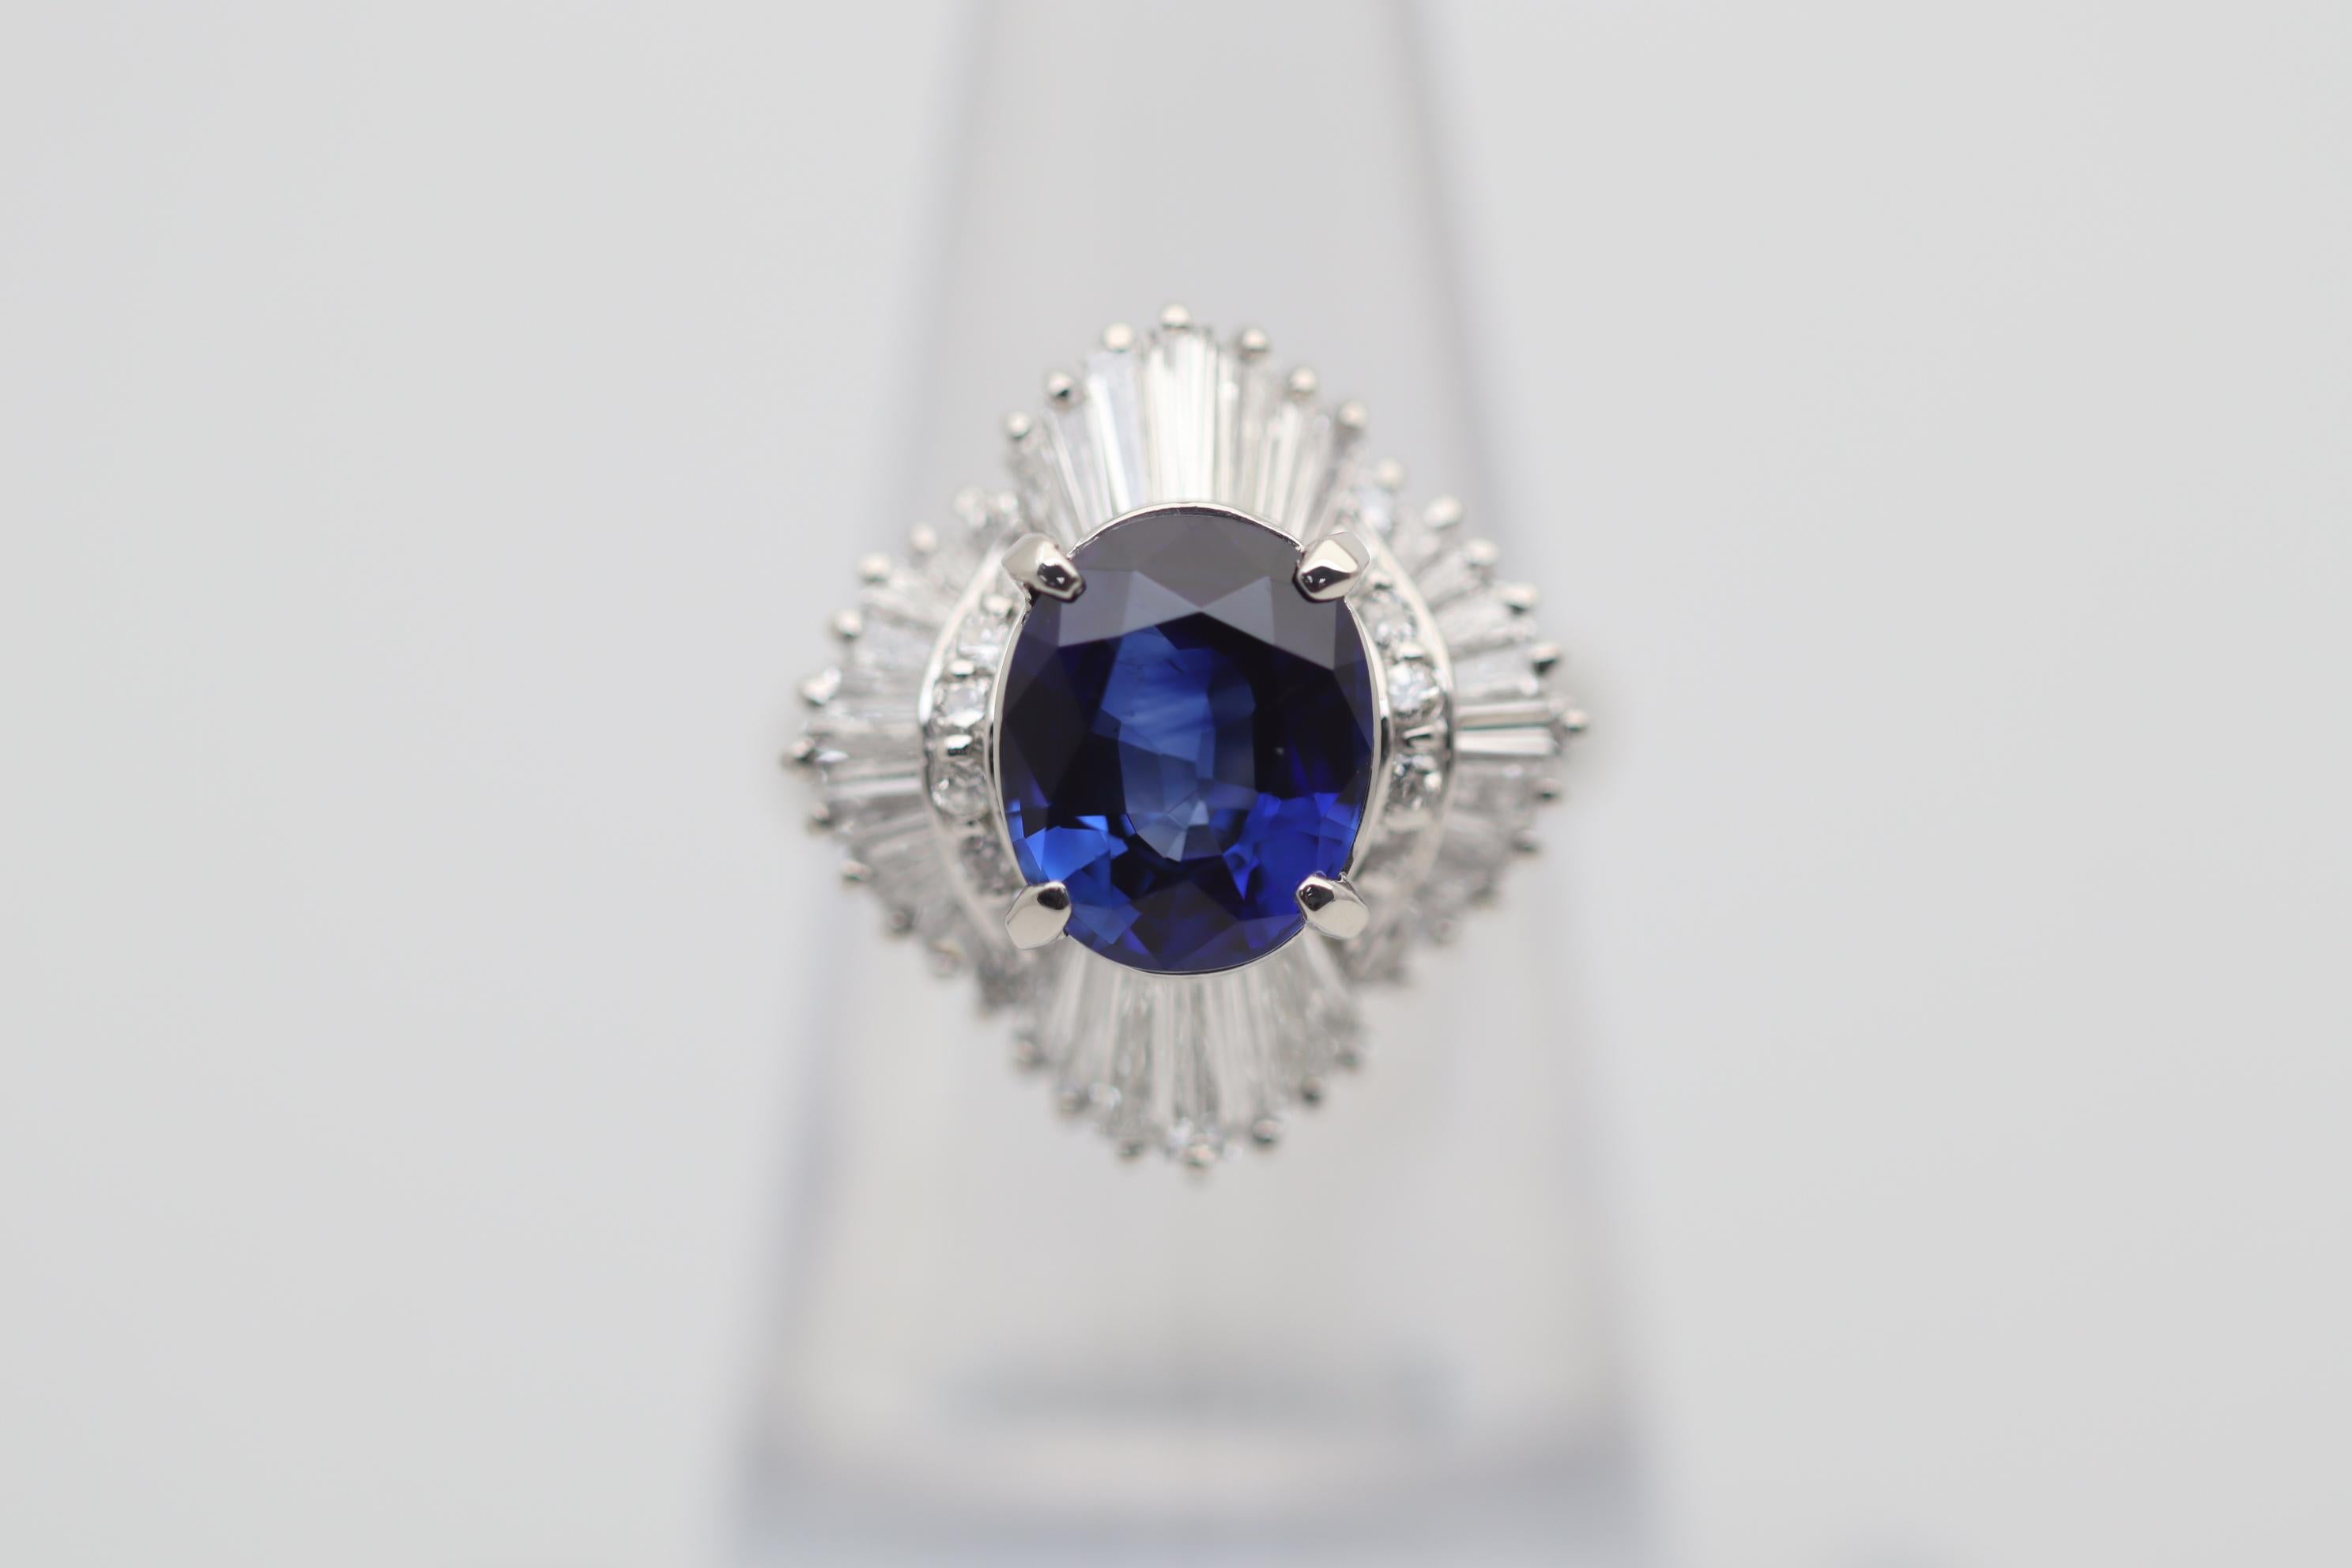 A lovely gem sapphire with a rich and intense blue color takes center stage. It weighs 3.16 carats and has excellent clarity allowing the stone's natural fine color to shine. It is complemented by 1.14 carats of round brilliant and baguette-cut